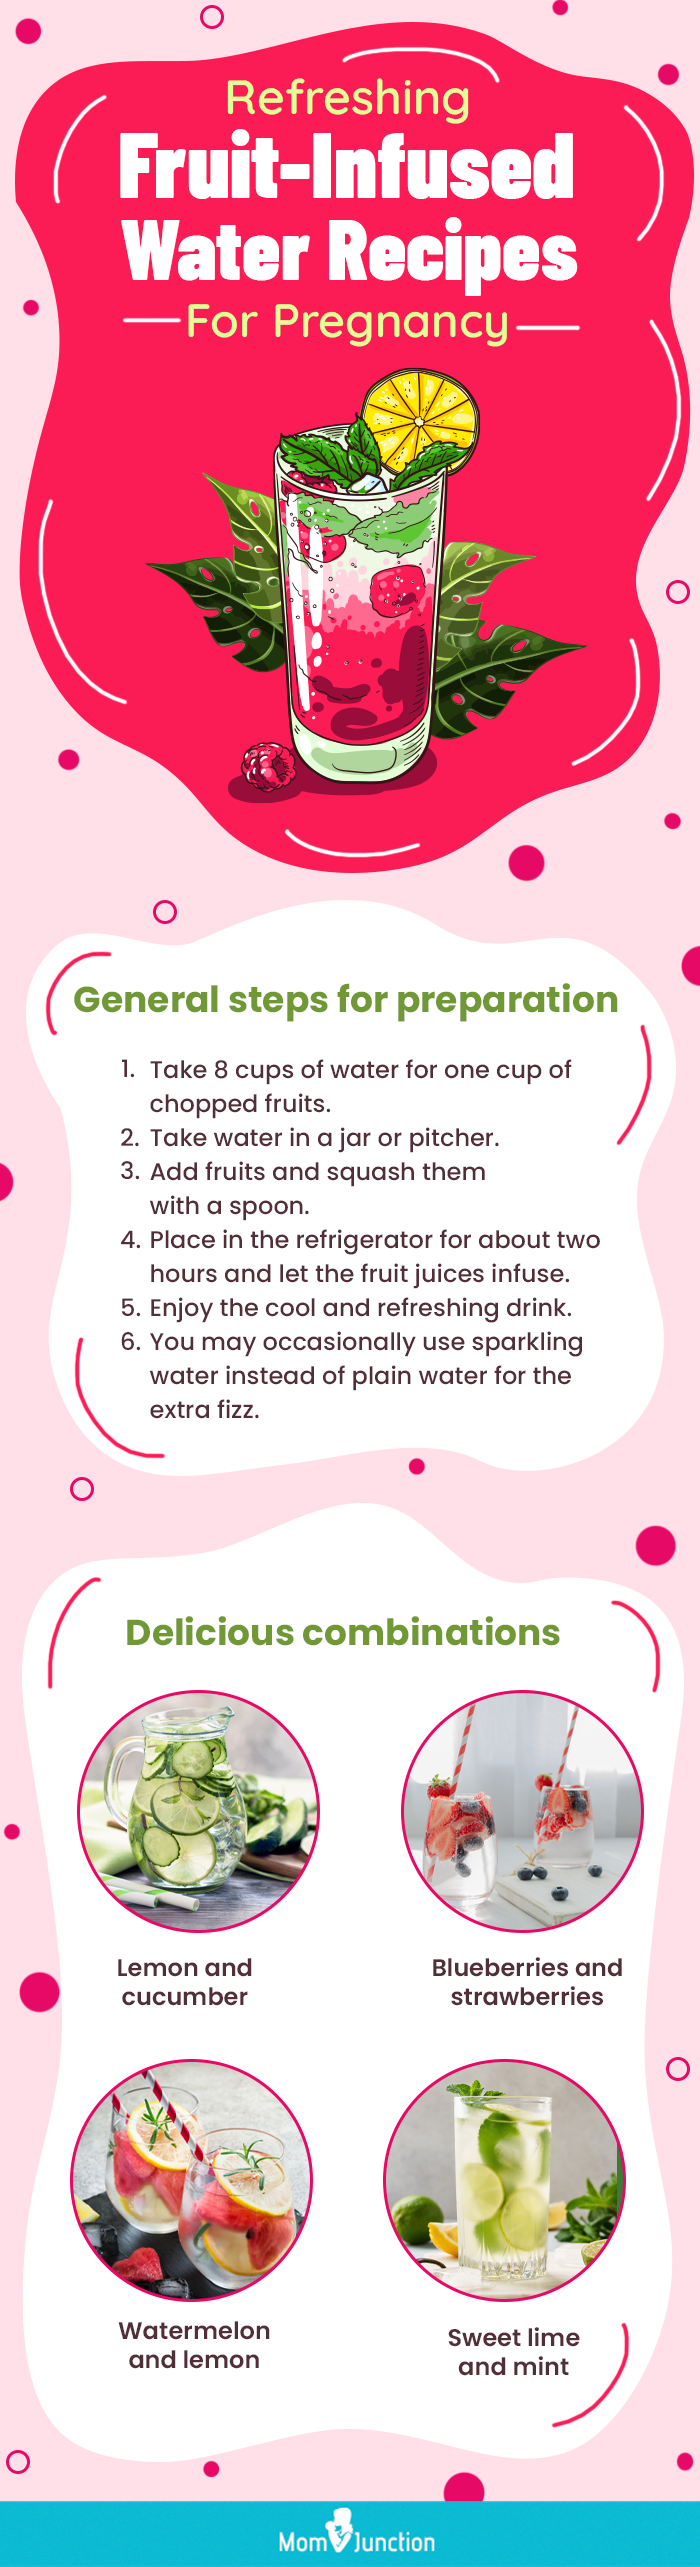 refreshing fruit infused water recipes for pregnancy (infographic)